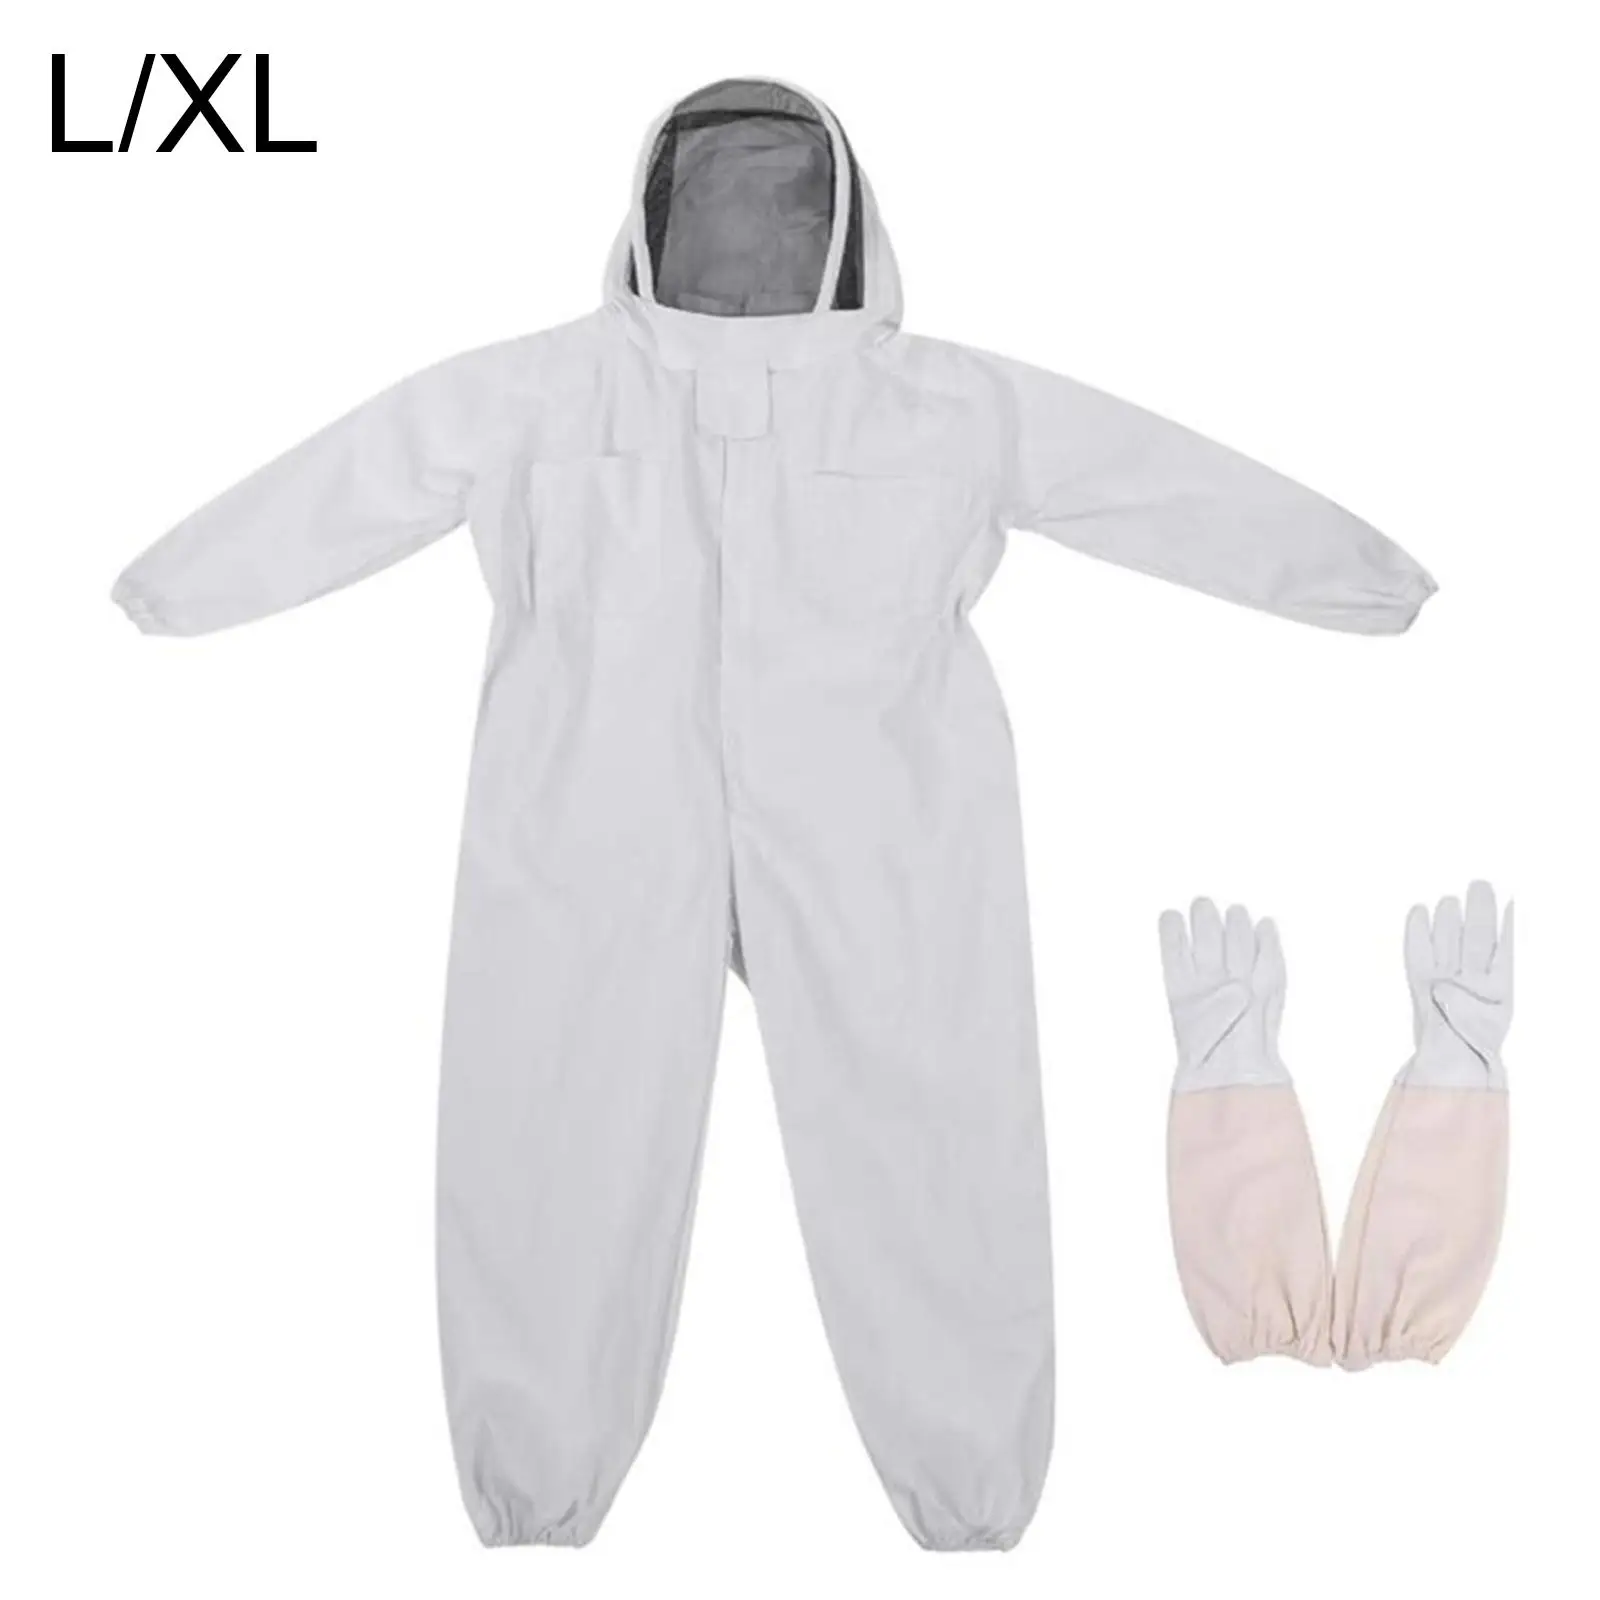 Professional Cotton Full Body Beekeeping Suit W/ Veil Hood + Long Gloves